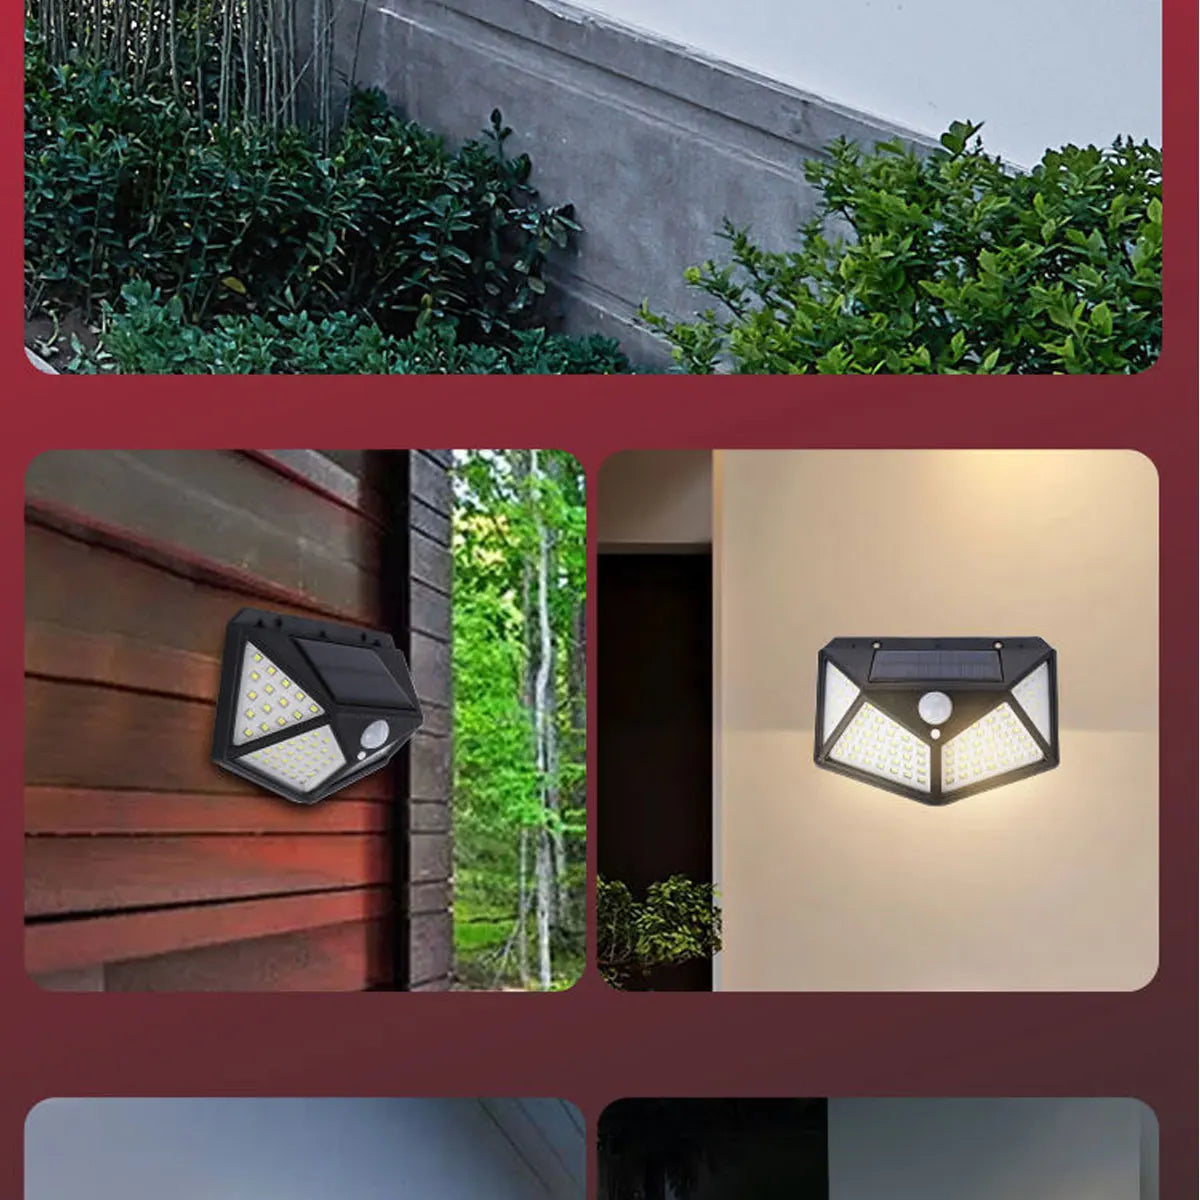 Solar-powered LED light with IP65 protection, 3-year warranty, and certifications from CE, EMC, LVD, and ROHS.